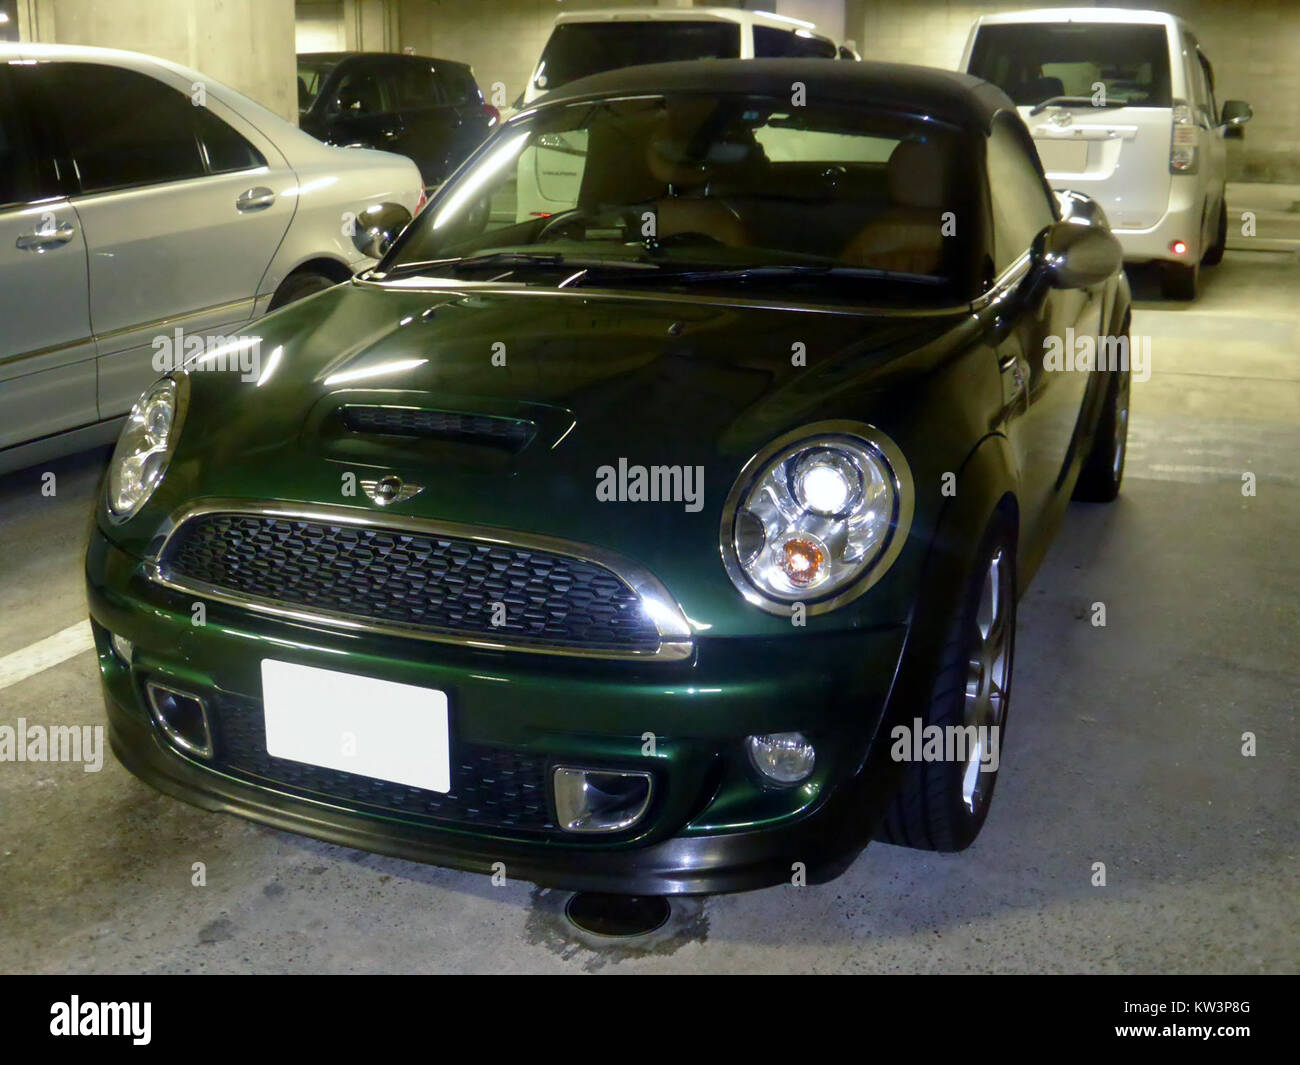 BMW MINI COOPER S ROADSTER (R59) front Stock Photo